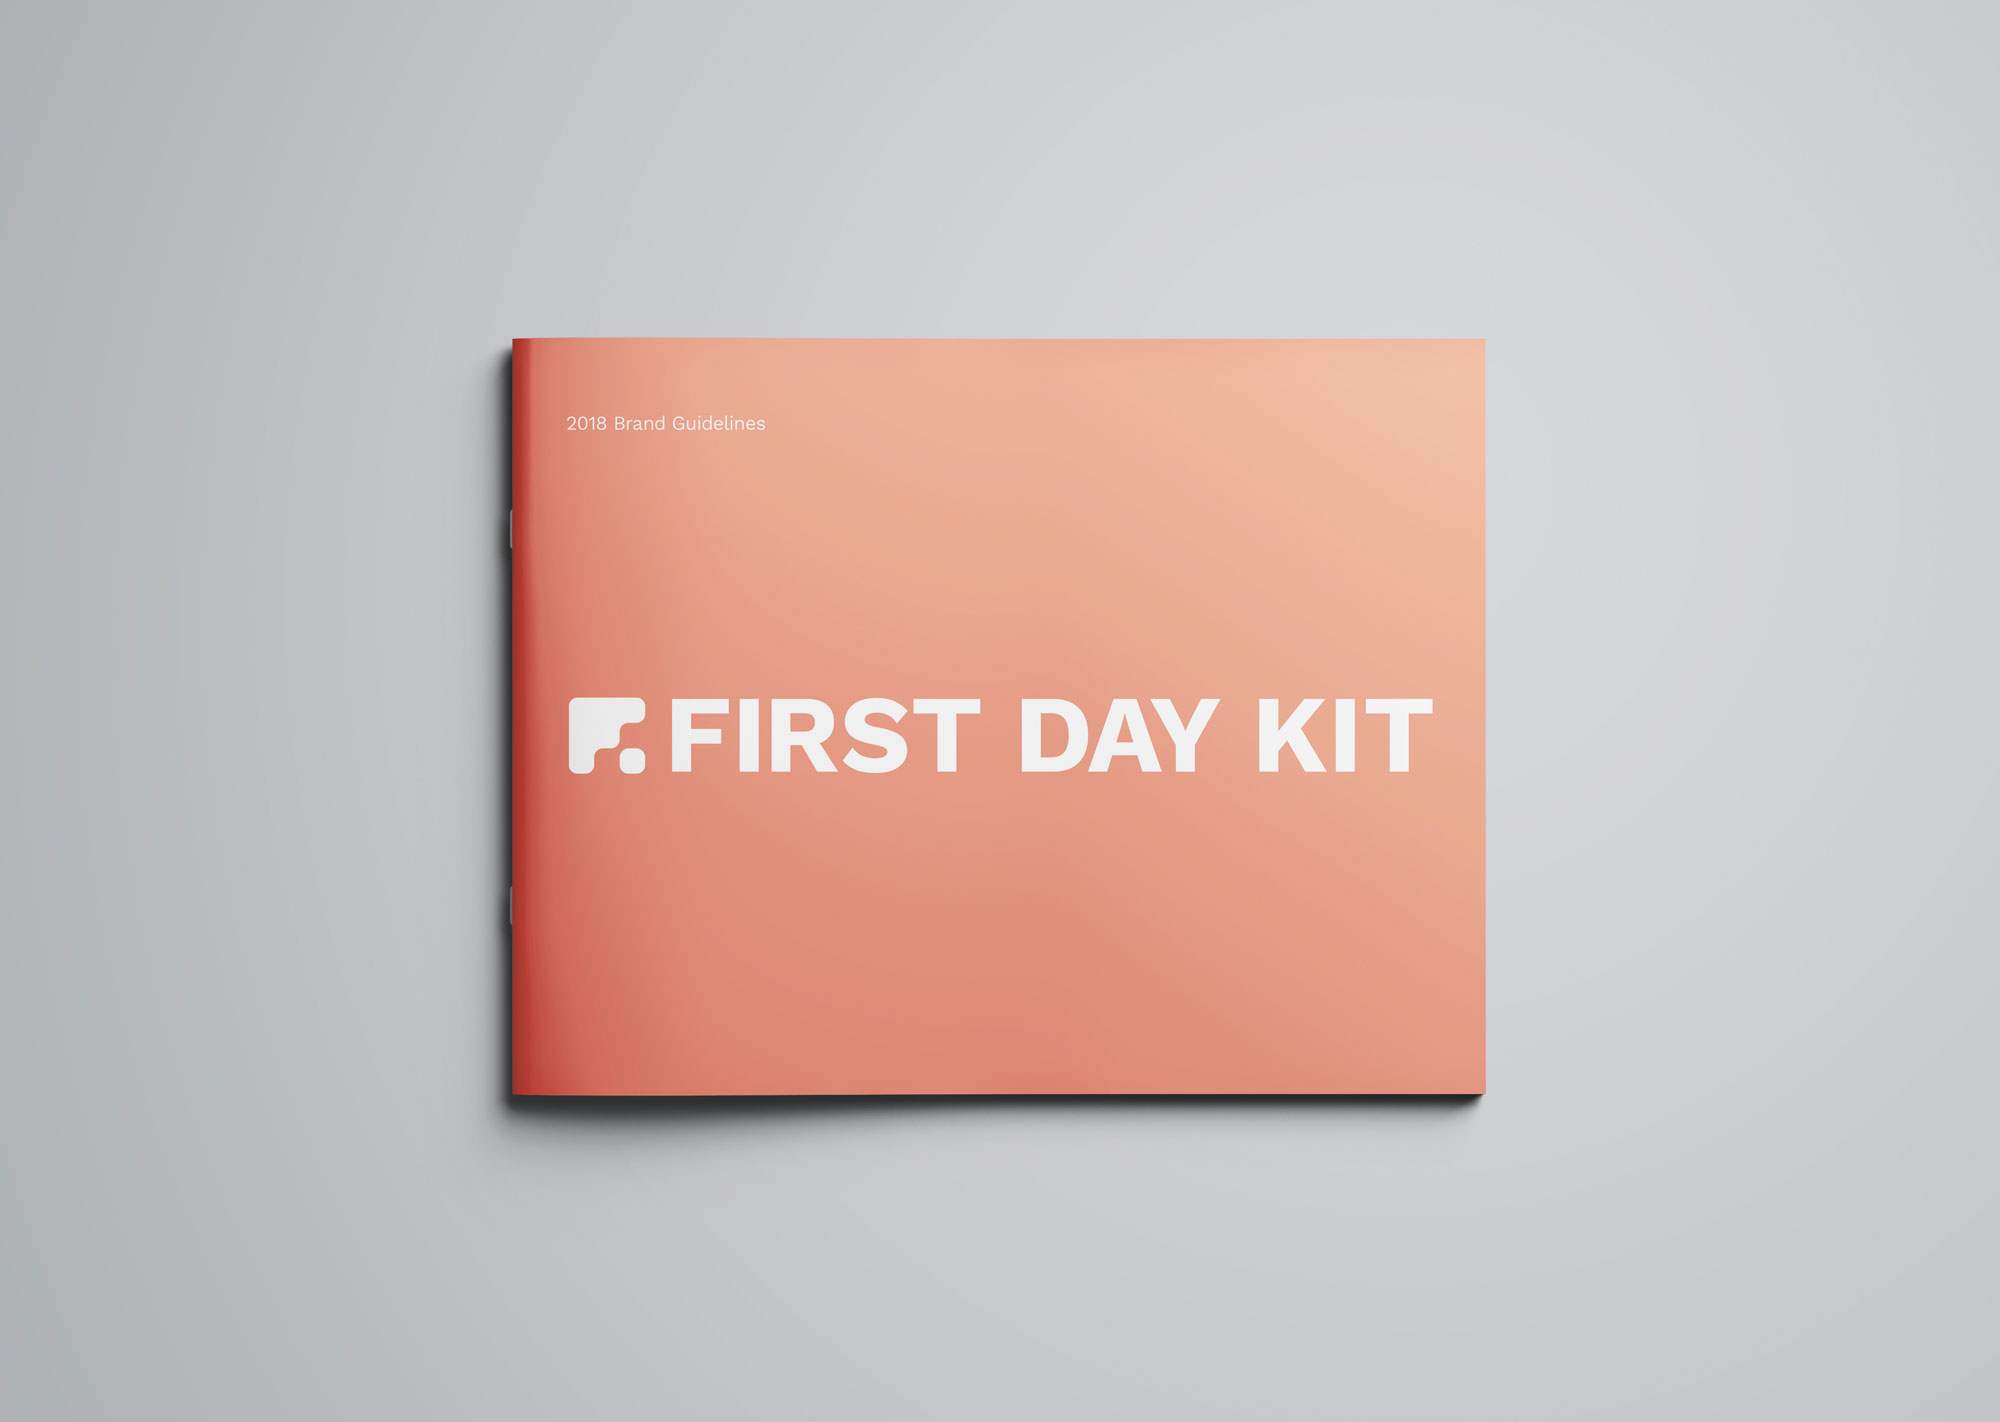 Outside front cover of the branding guidelines